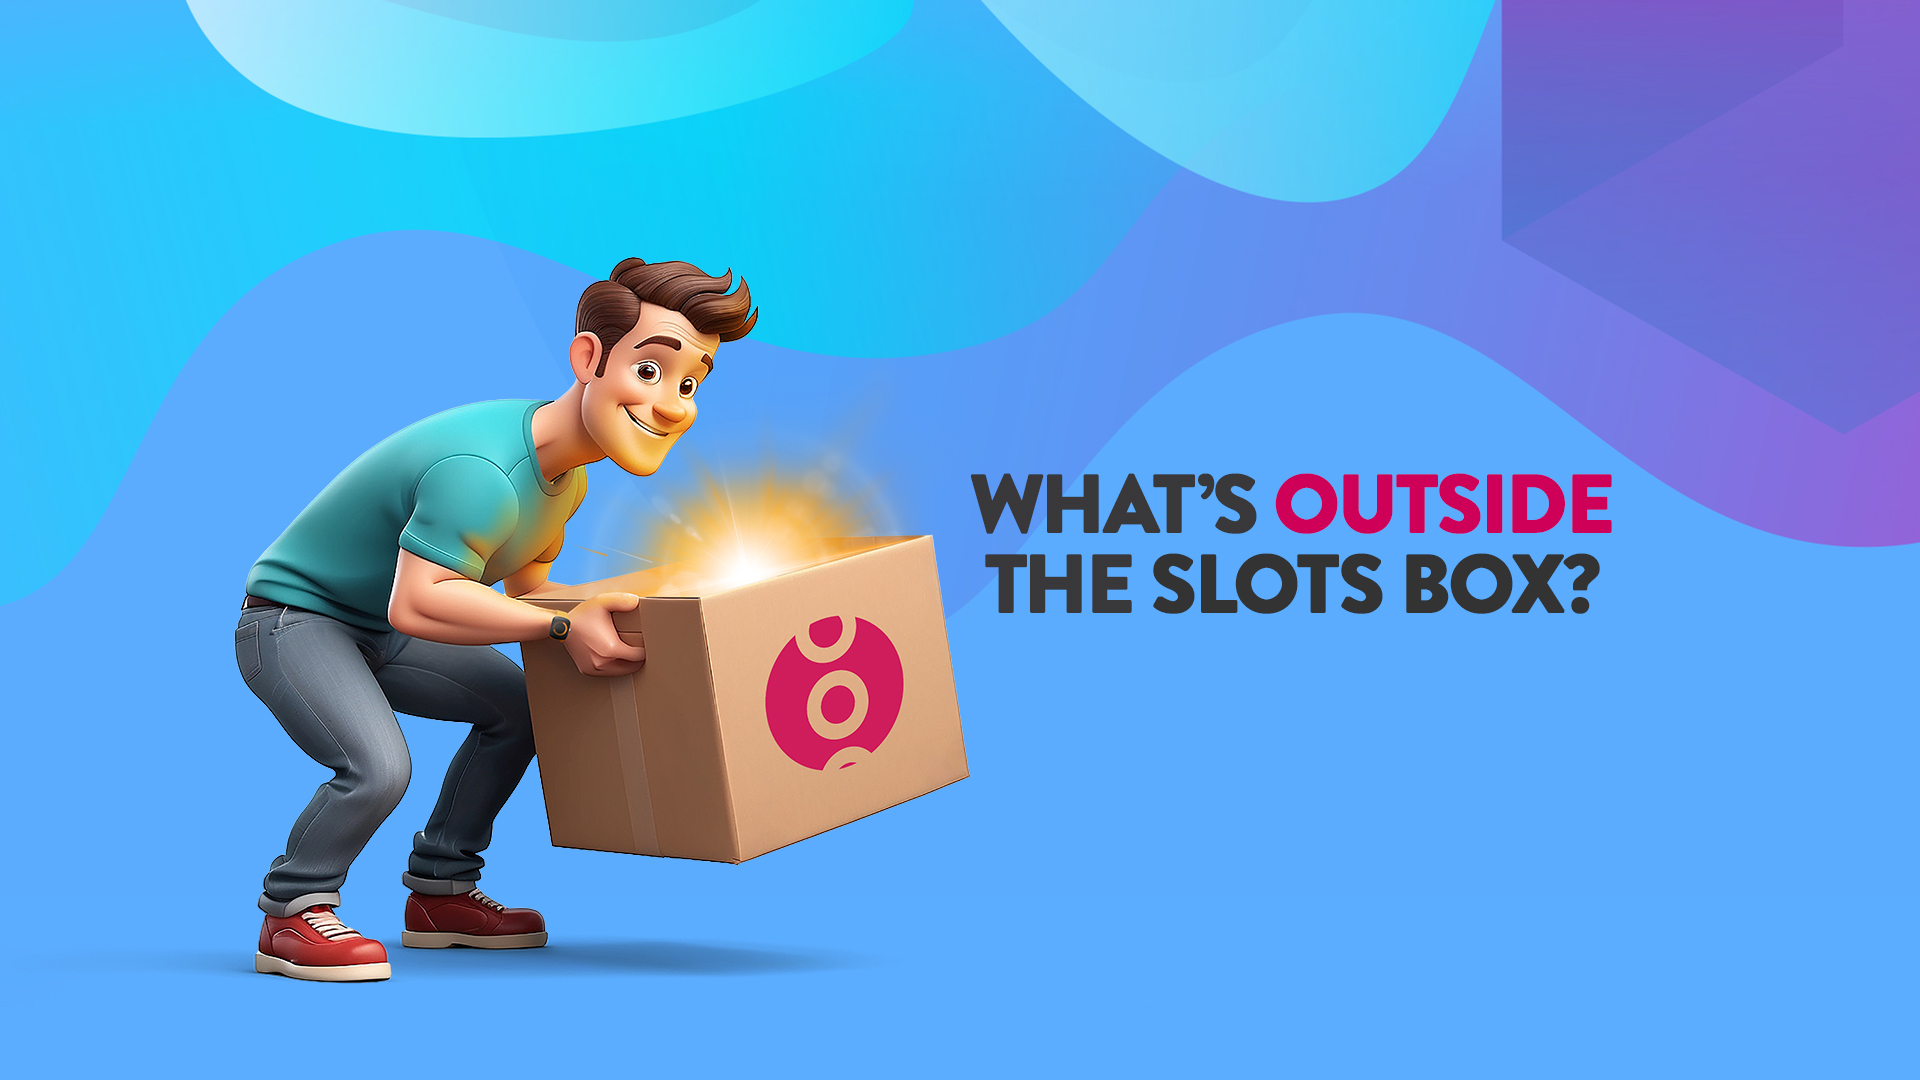 Man is bent over holding a box next to text that reads ‘What’s Outside the Slots Box?’ over a blue background.